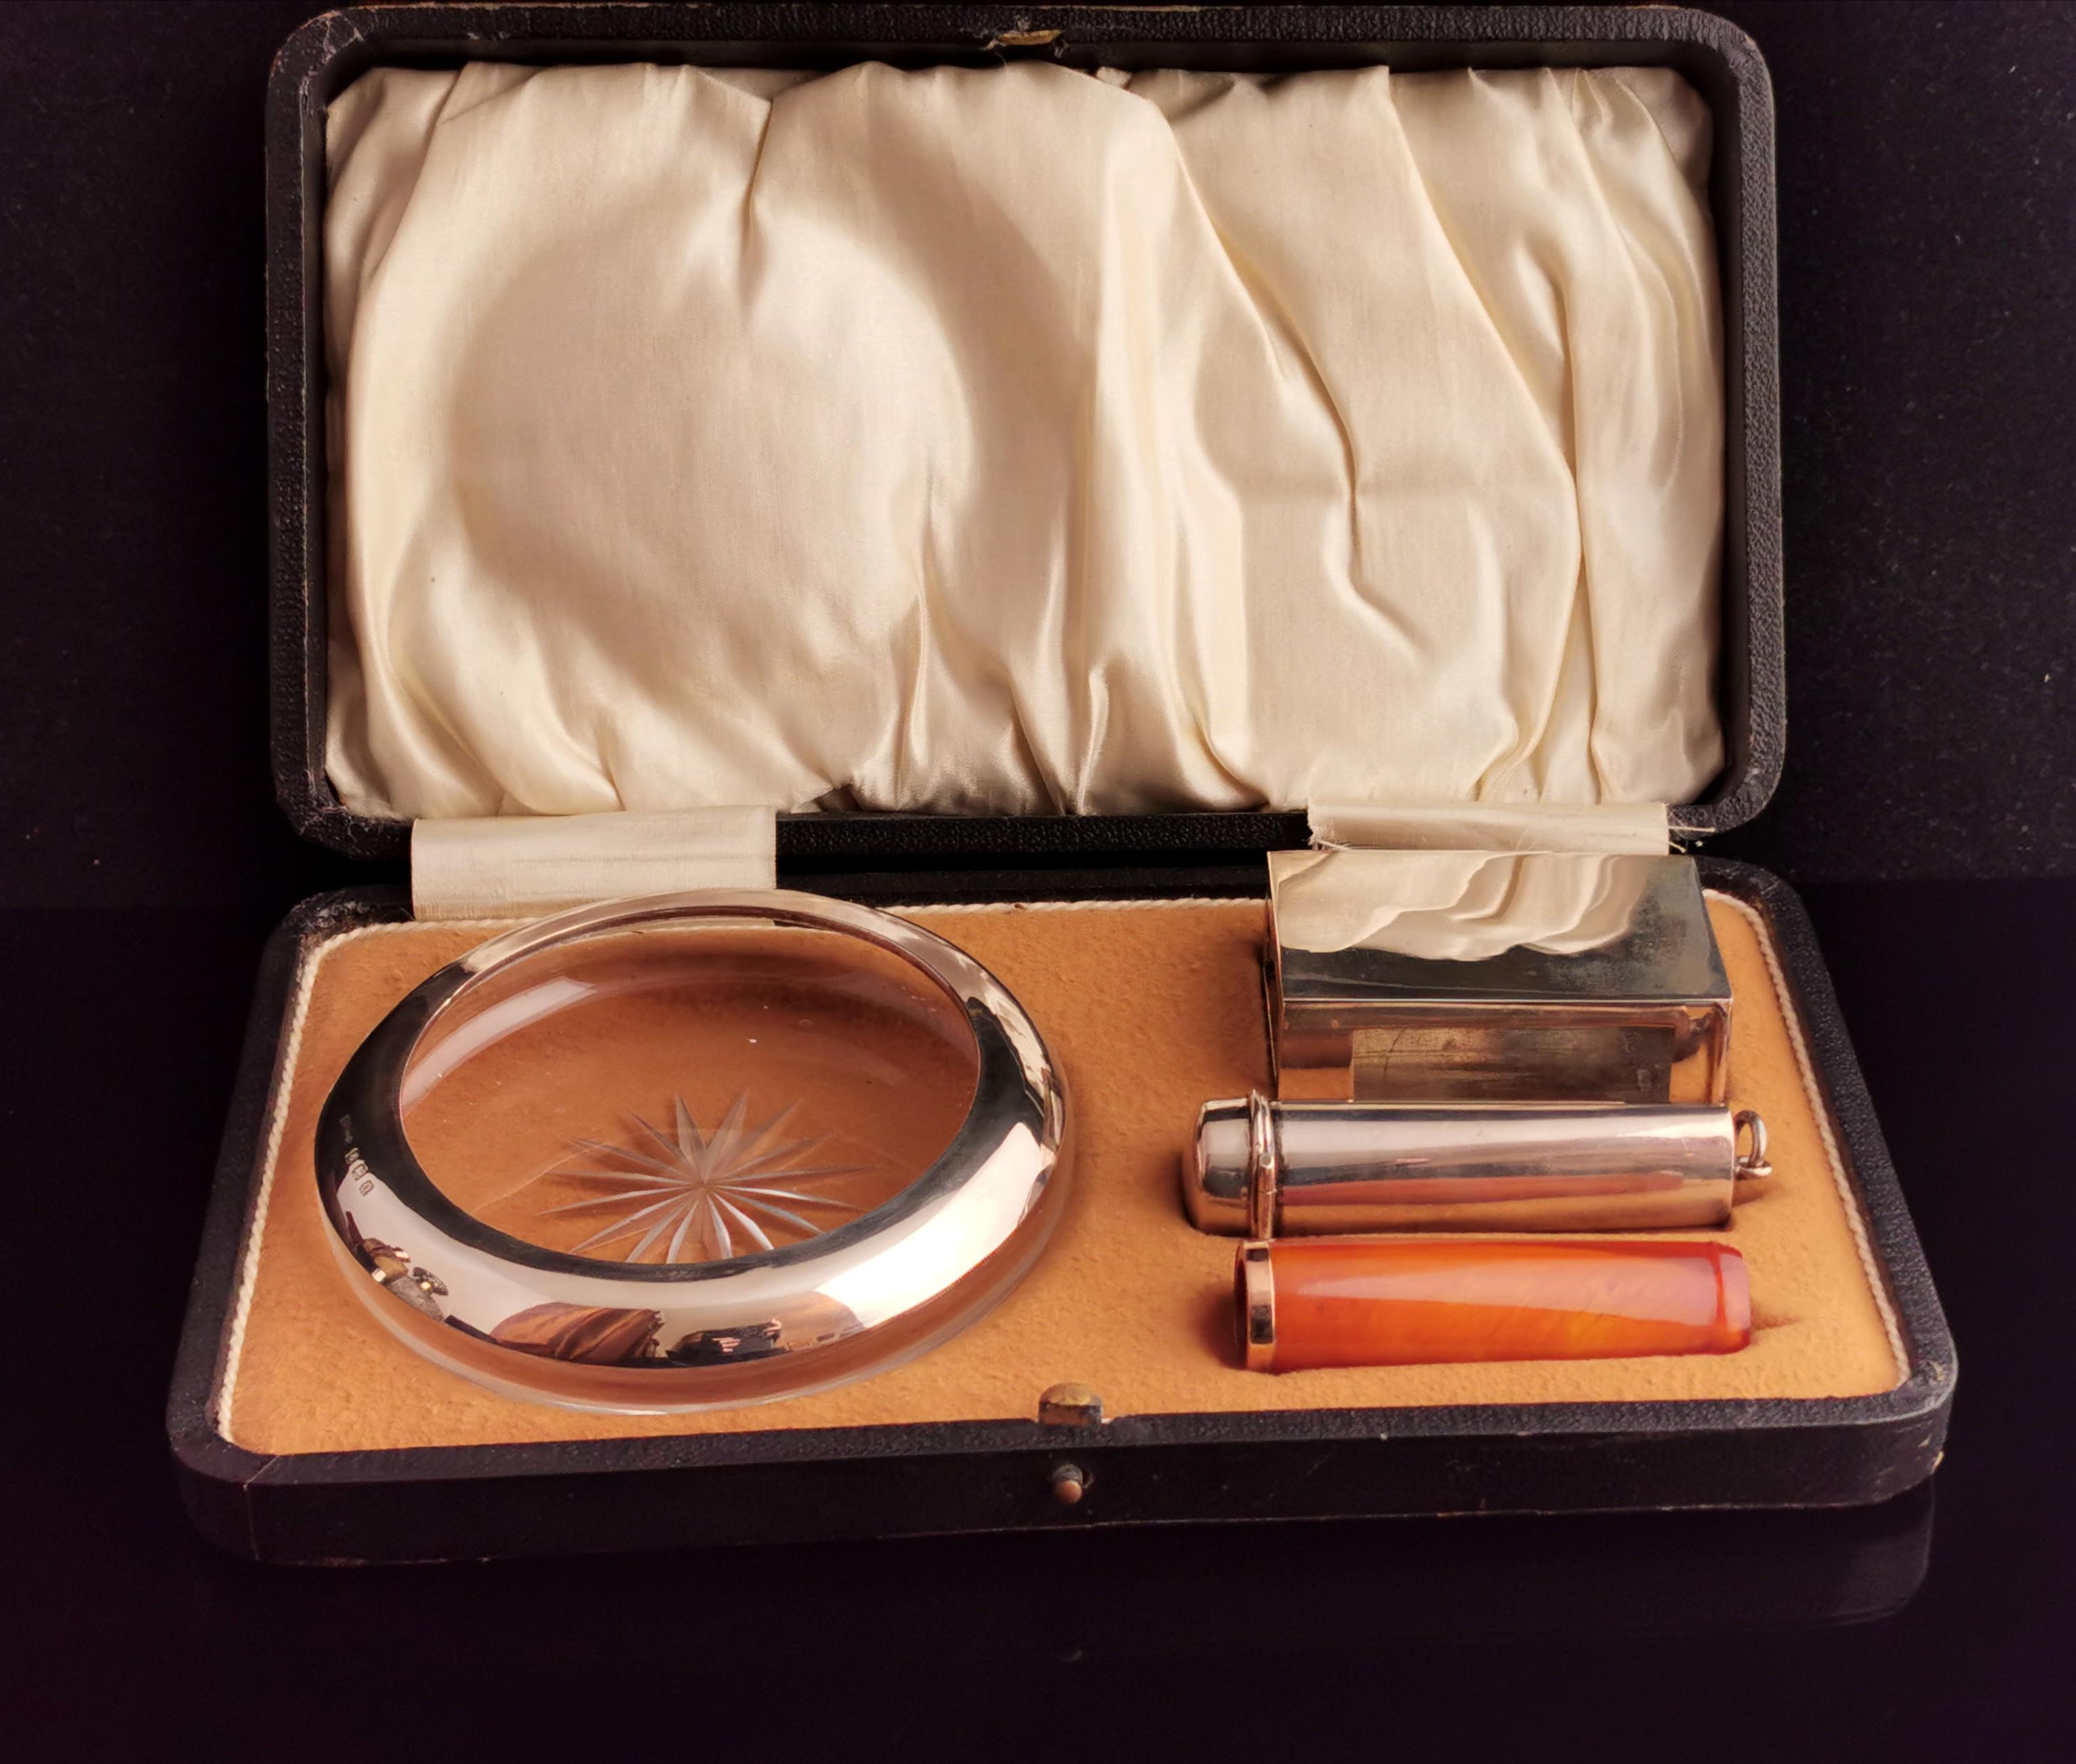 A stunning antique, early 1910s era, cigar smokers set.

The set consists of a cut glass ashtray with a sterling silver rim, starburst cut base, a fully hallmarked silver cheroot case with gilt lining.

There is a silver match box cover and an Amber